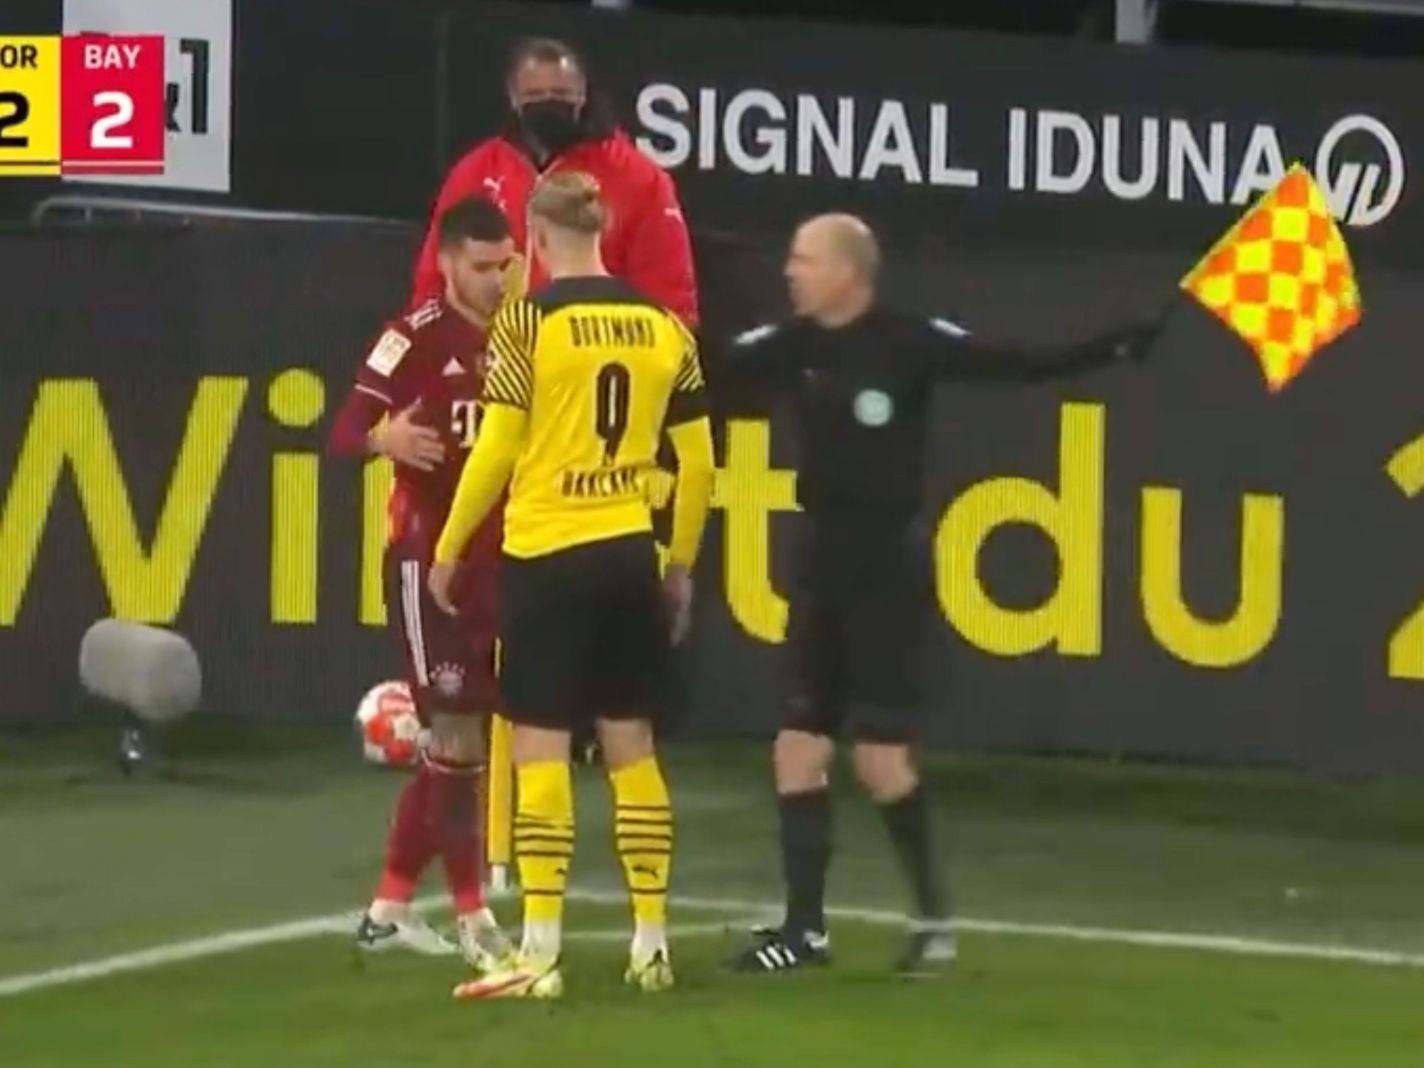 Bayern Munich's Lucas Hernandez was ready to square up after a challenge but made amends when he realized that it was the enormous Borussia Dortmund forward Erling Haaland who had upended him.